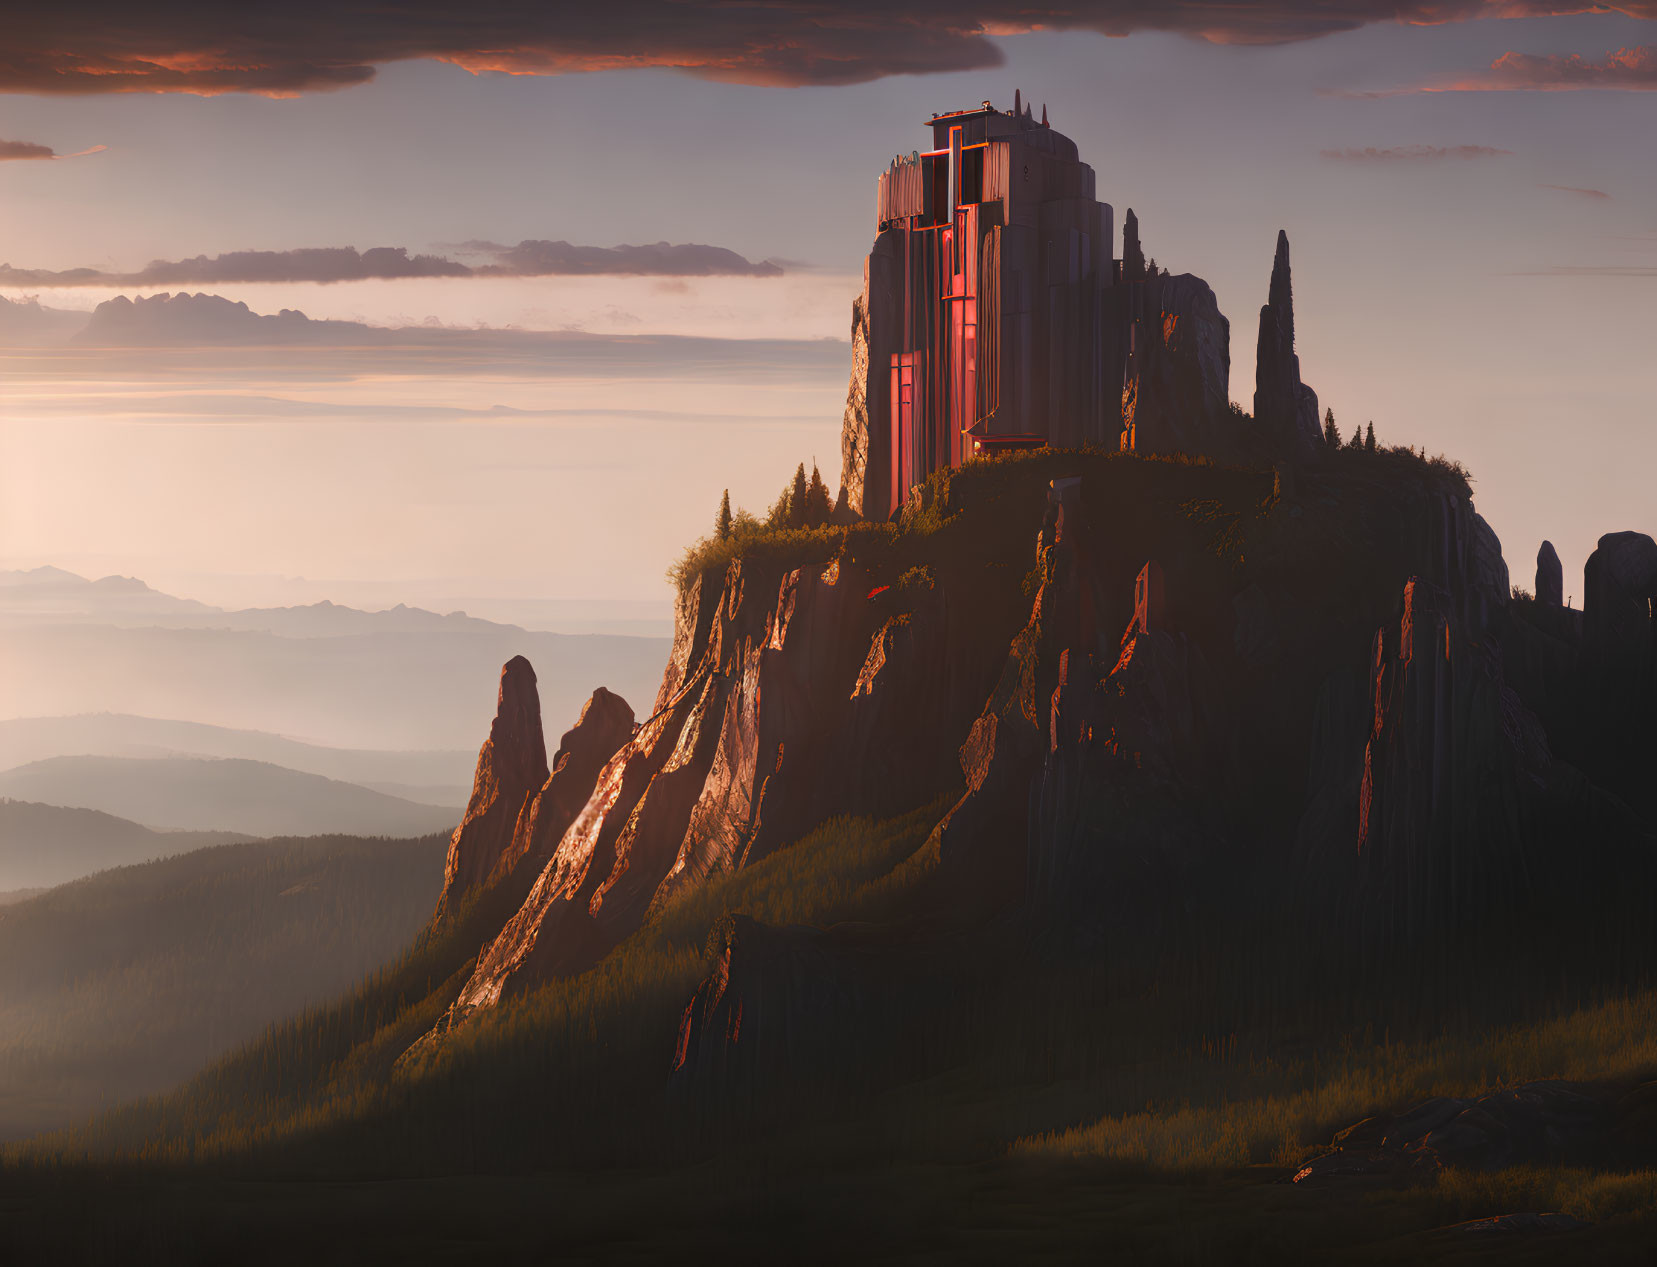 Majestic castle on steep cliff at sunset overlooking misty valley